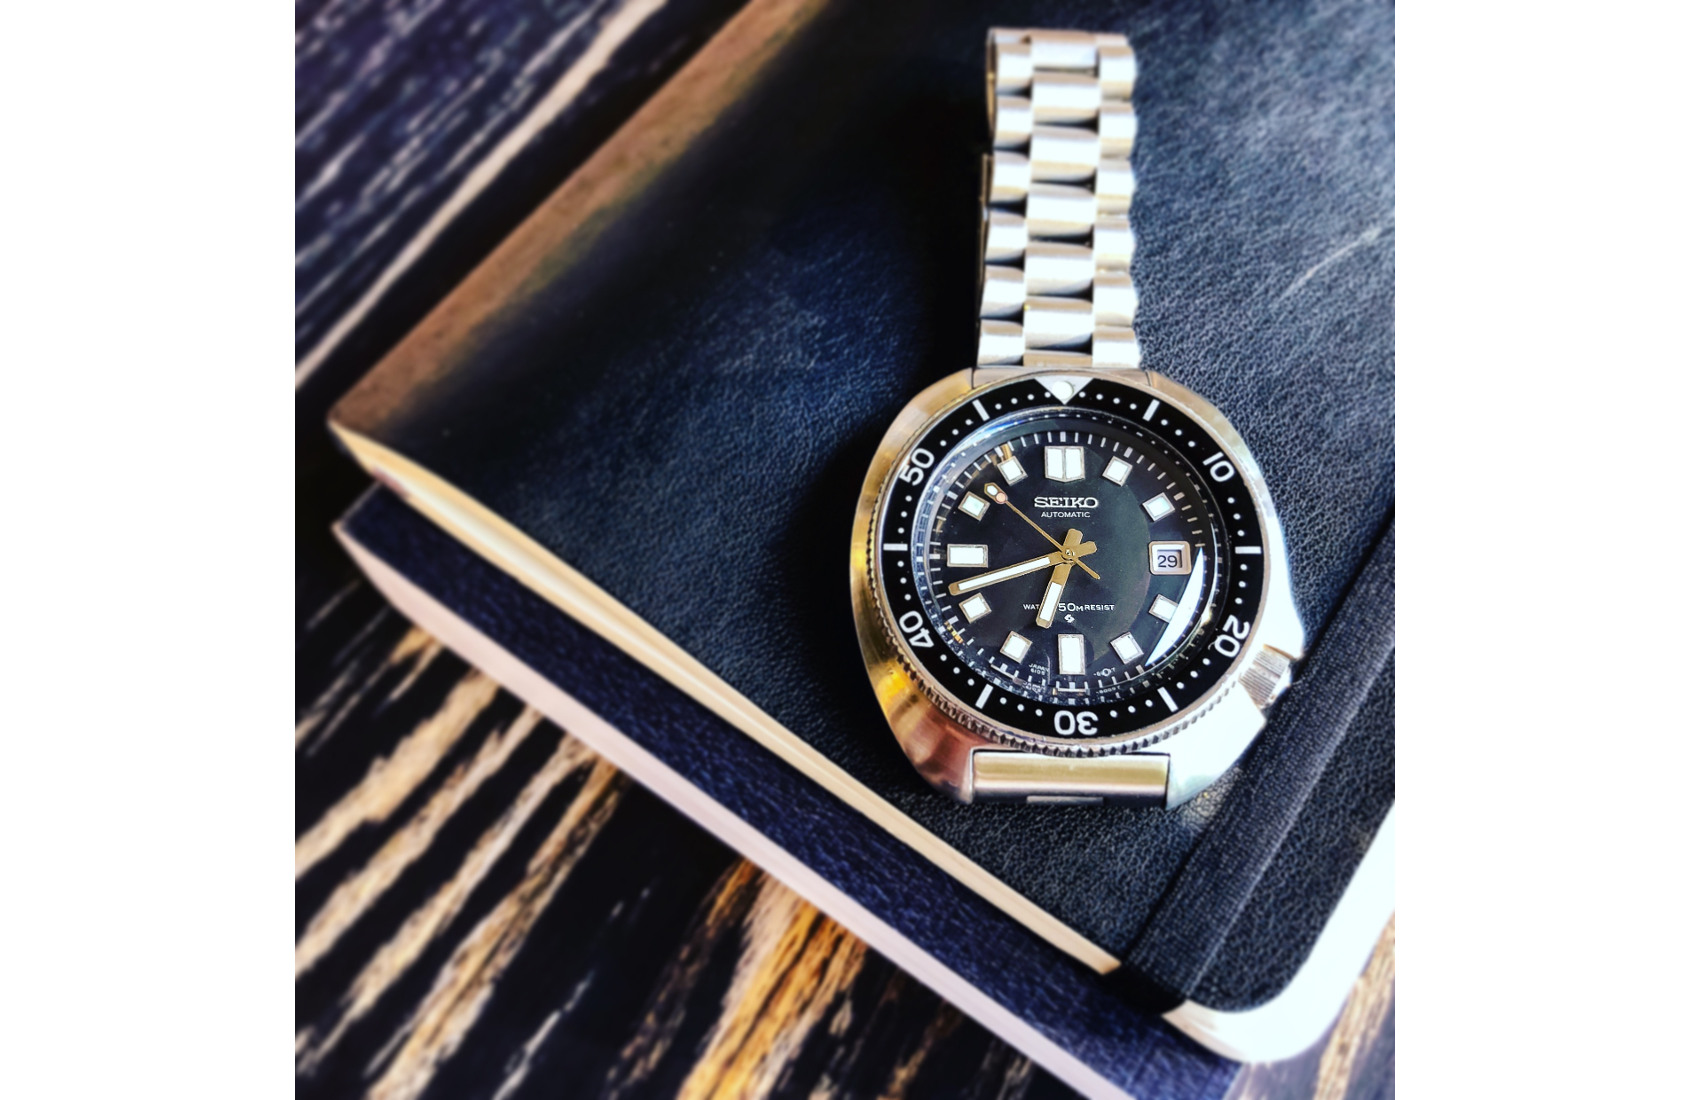 WHAT SEALED THE DEAL: On Chad's vintage Seiko 6105 - Time and Tide Watches